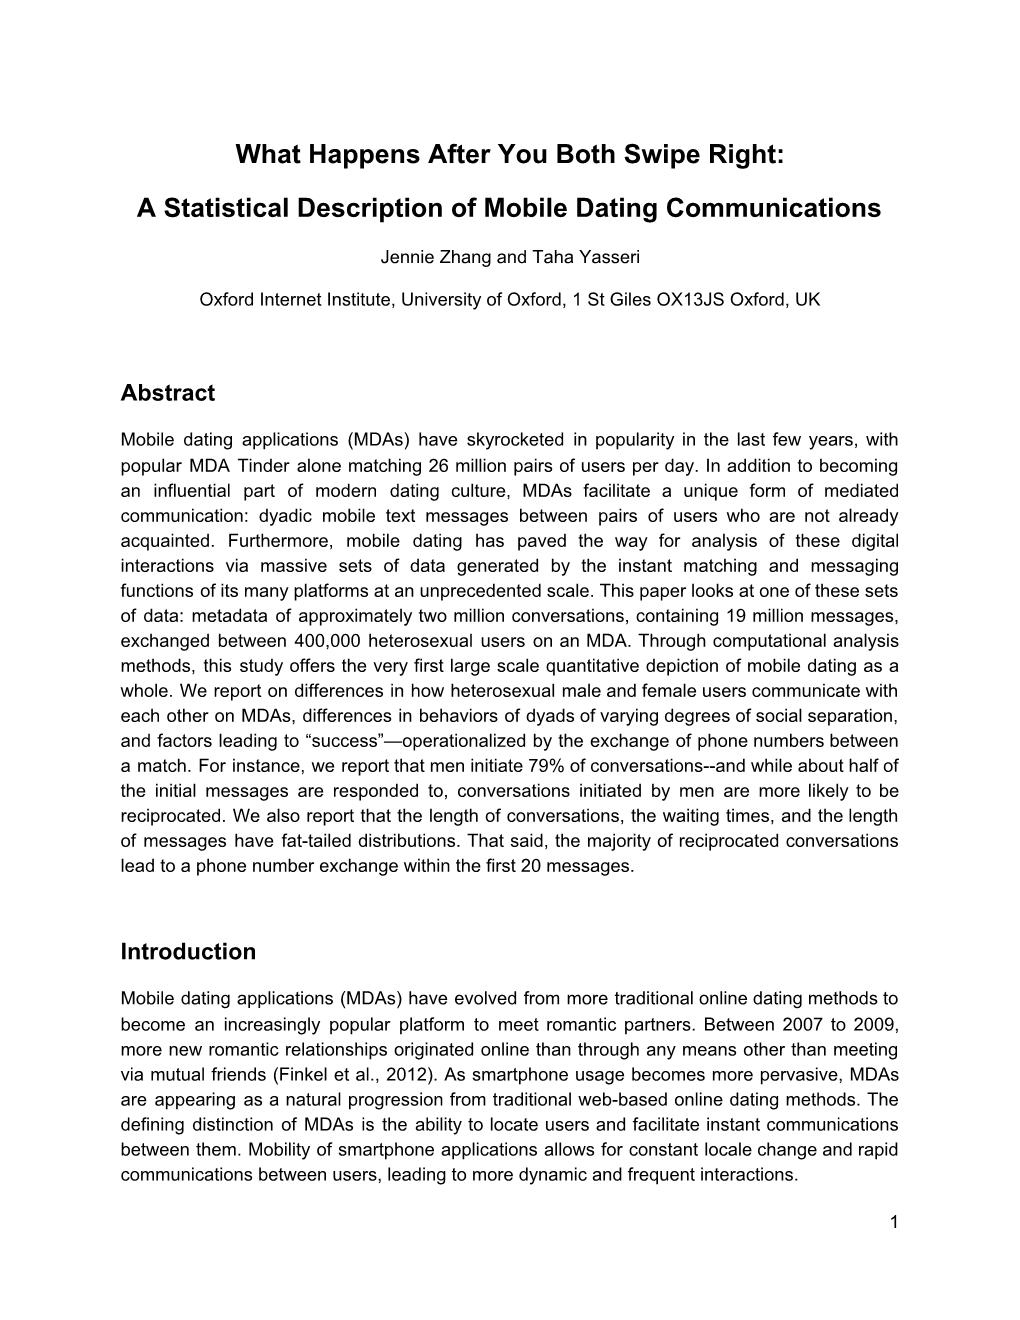 What Happens After You Both Swipe Right: a Statistical Description of Mobile Dating Communications